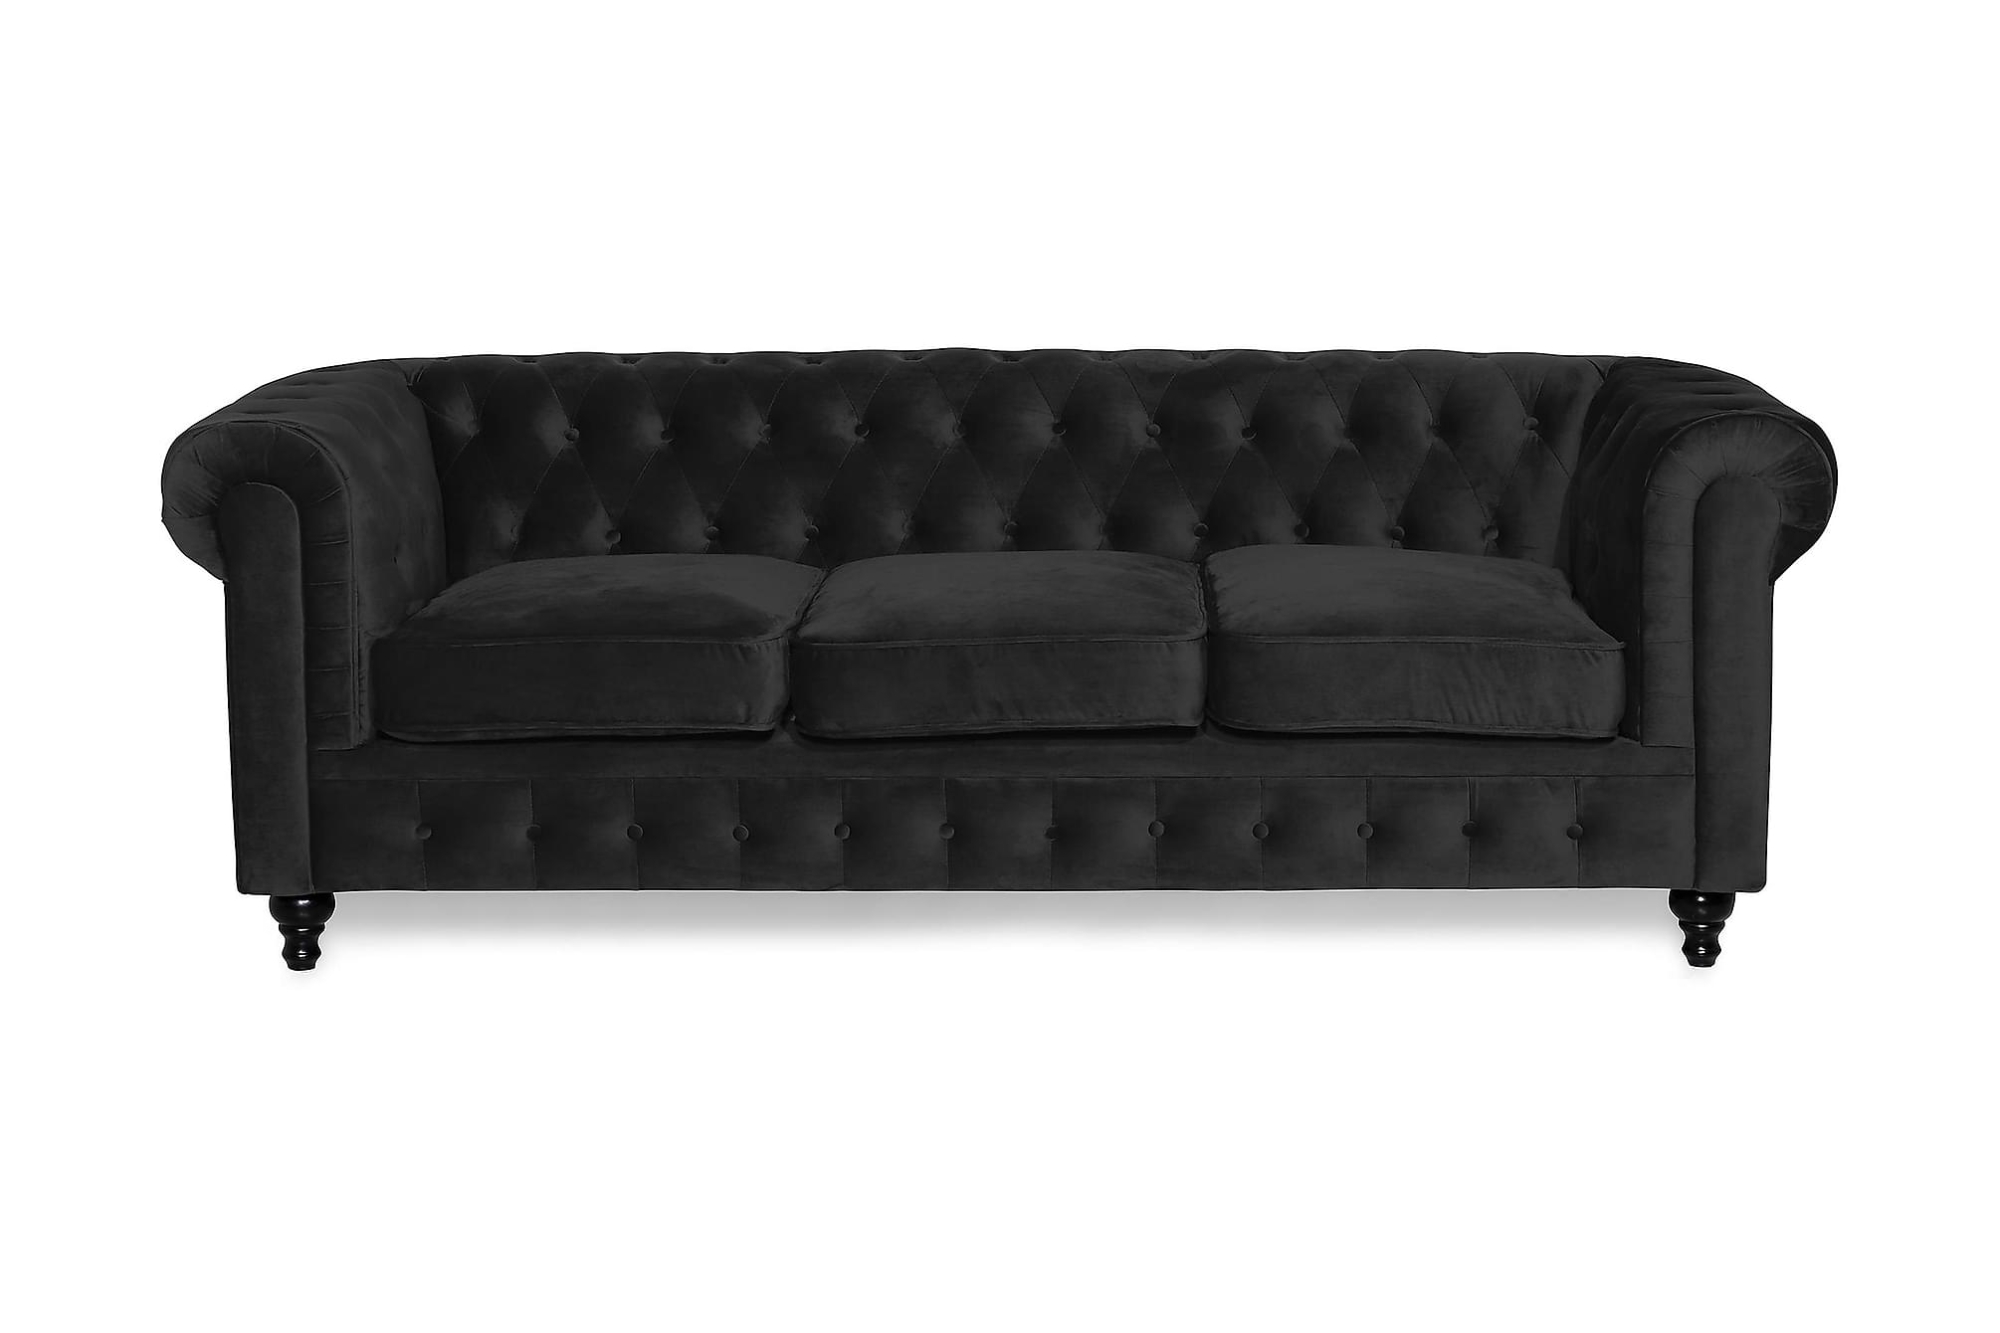 6: Chesterfield Lyx 3 Pers. Sofa, Sort Velour